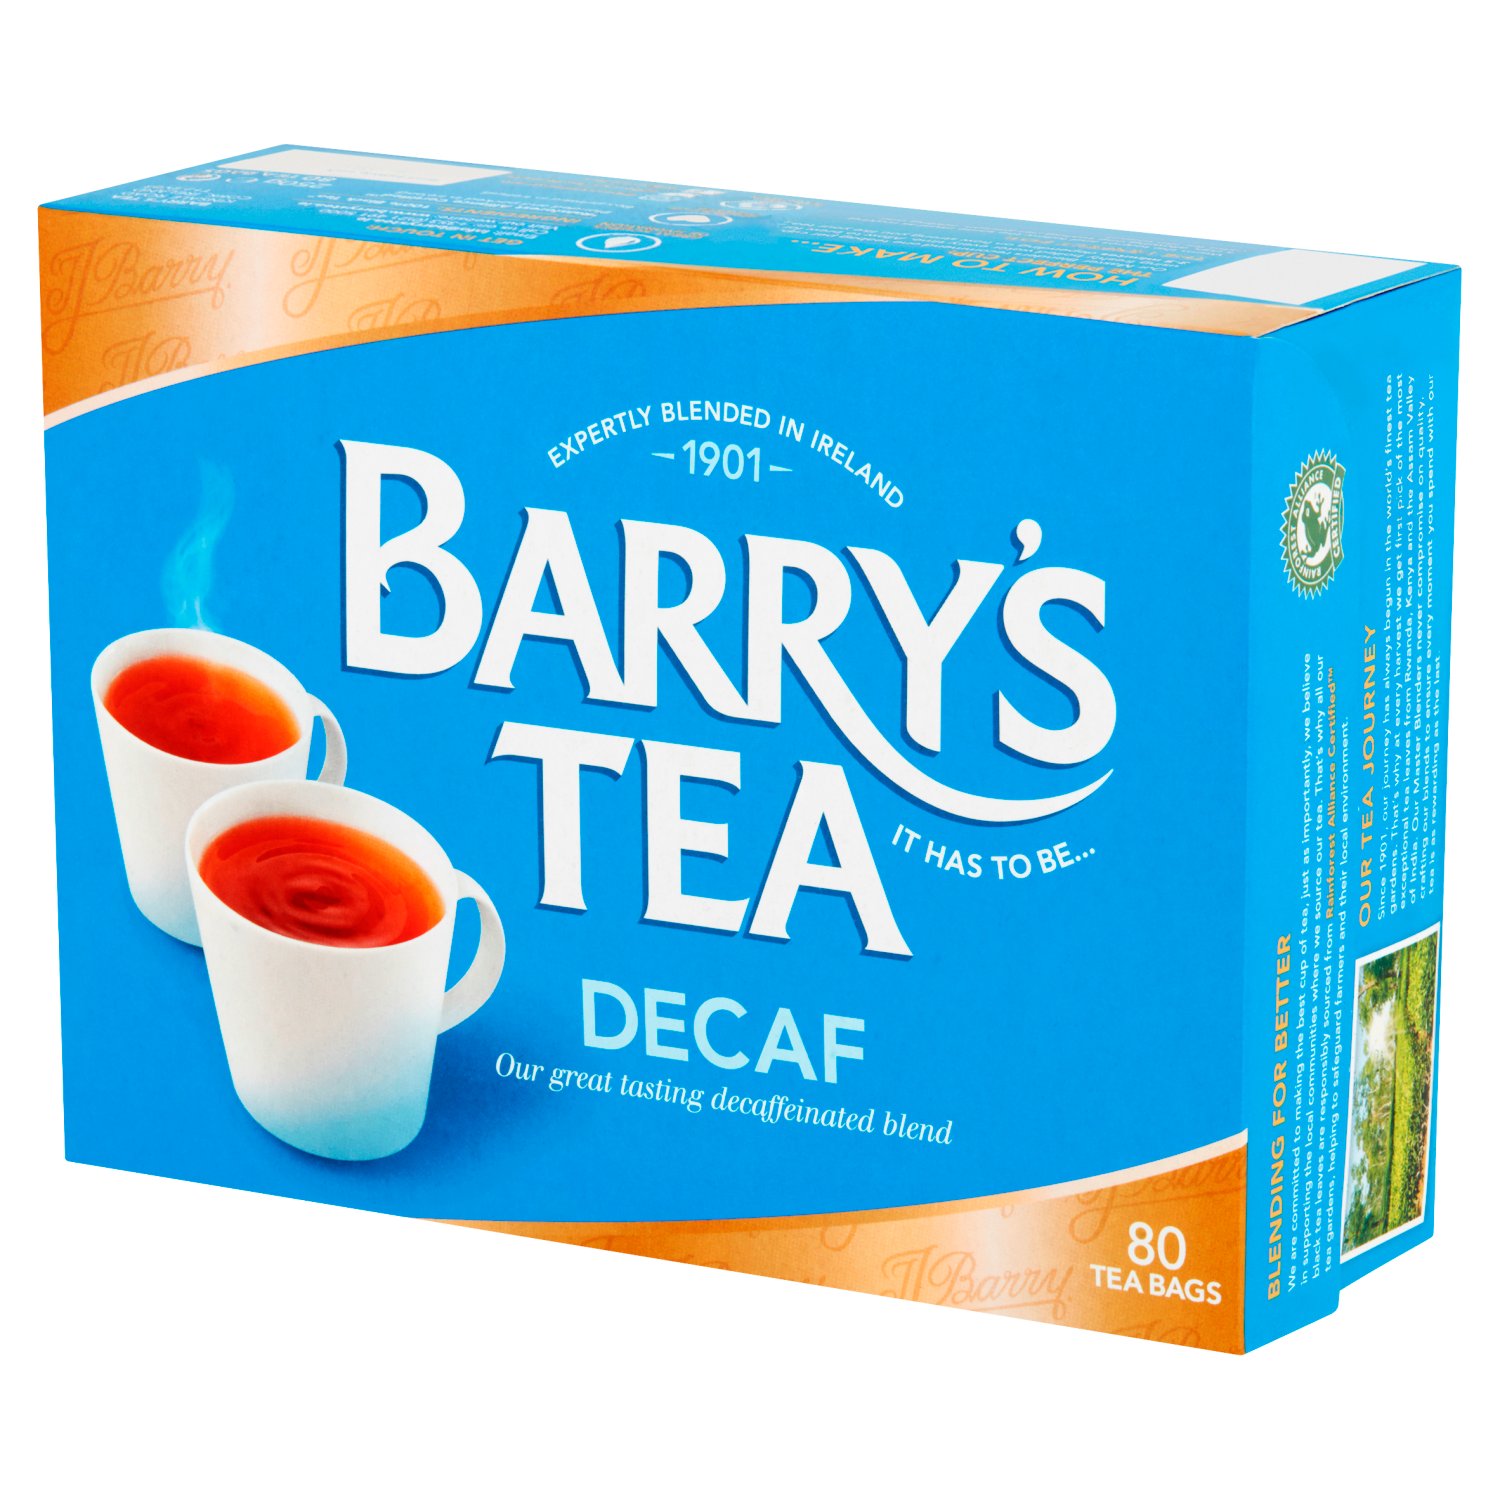 It has to be... Barry's Decaf
We at Barry's Tea always use our skill and expertise to blend to Irish tastes. Our Decaf tea has all the flavour of Barry's Gold Blend, perfect anytime, day or night.

100% Natural Black Tea
From Rainforest Alliance Certified™ tea gardens

Selected and Sourced
Across Rwanda, Kenya and the Assam Valley of India

Expertly Blended in Ireland
By our Master Blenders who never compromise on quality

Making Tea Moments
It has to be... Barry's Tea